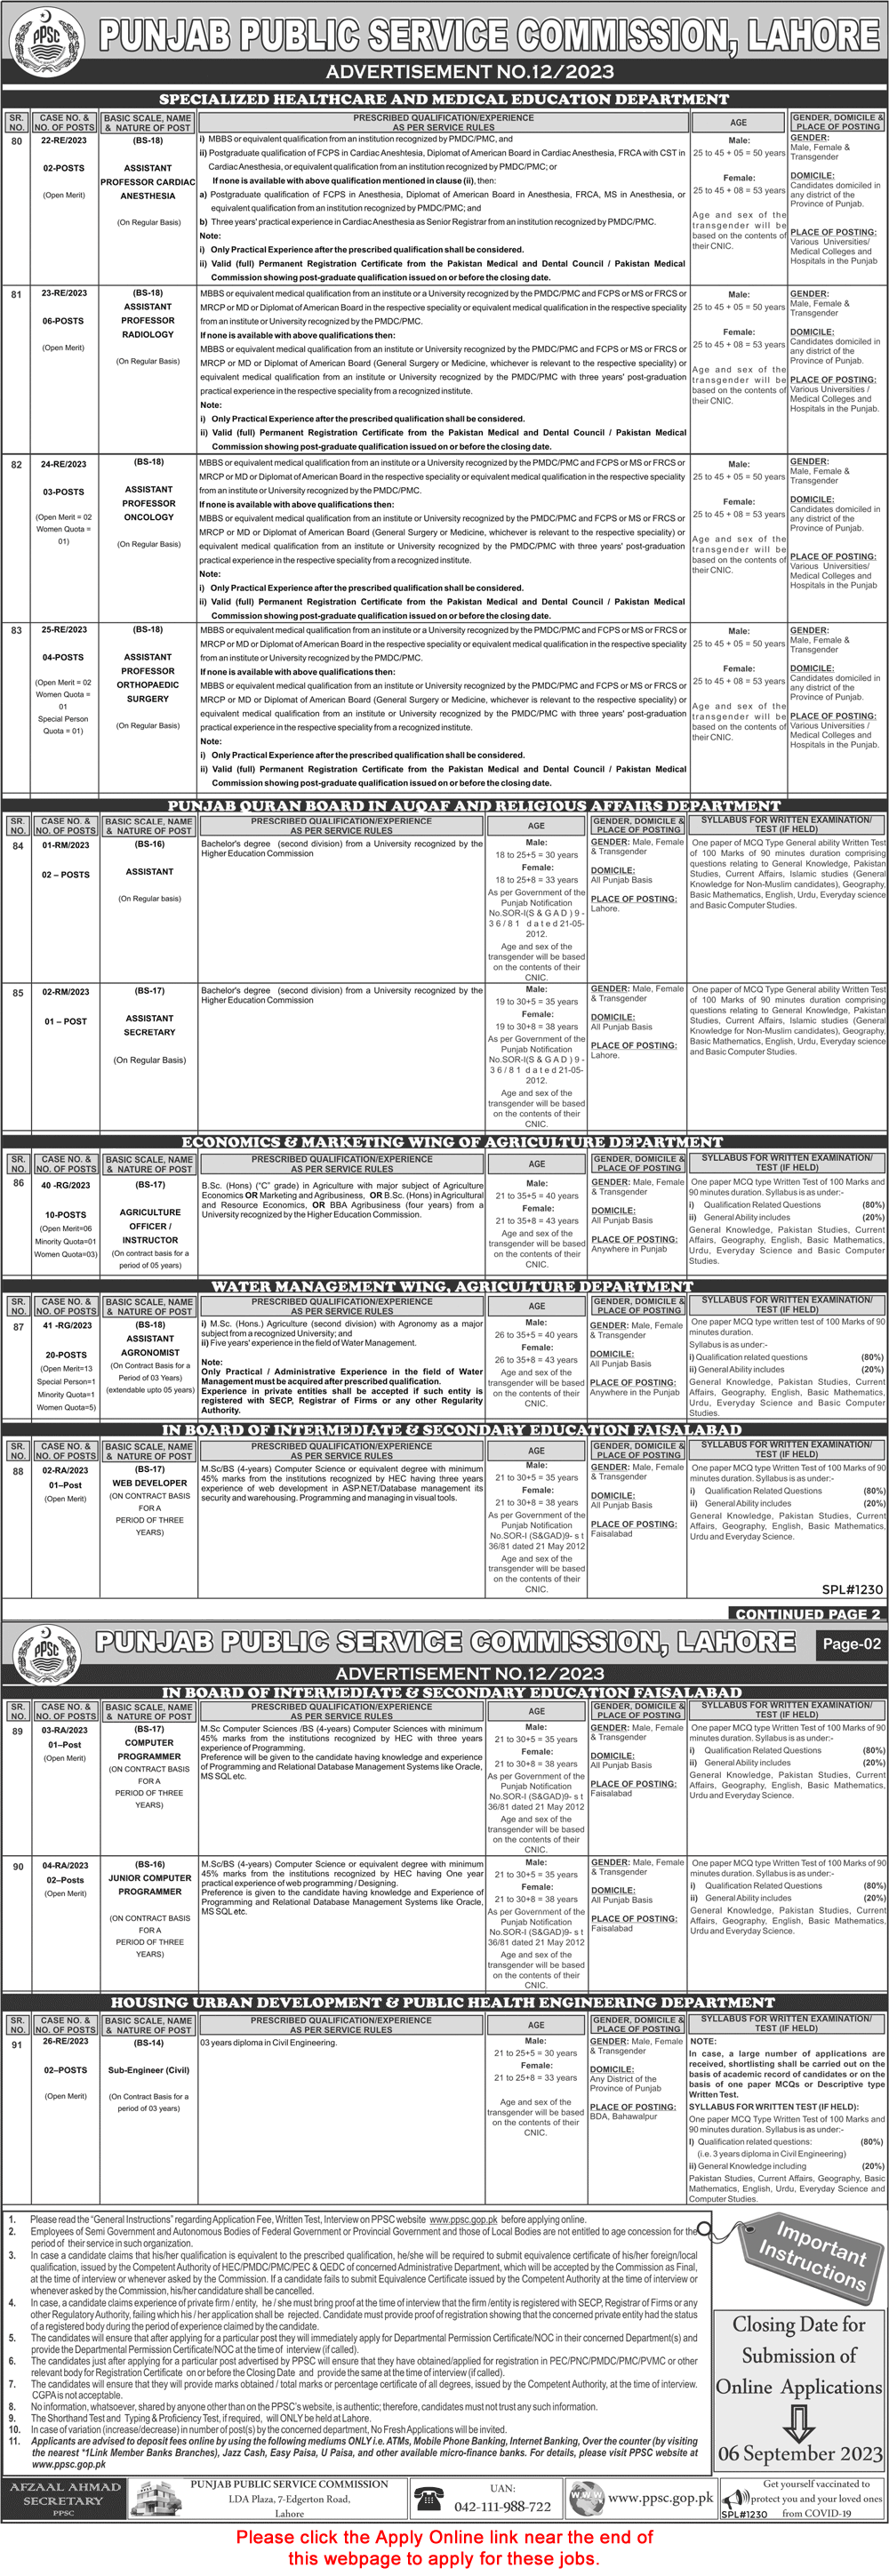 PPSC Jobs August 2023 Advertisement No 12/2023 Online Apply Latest